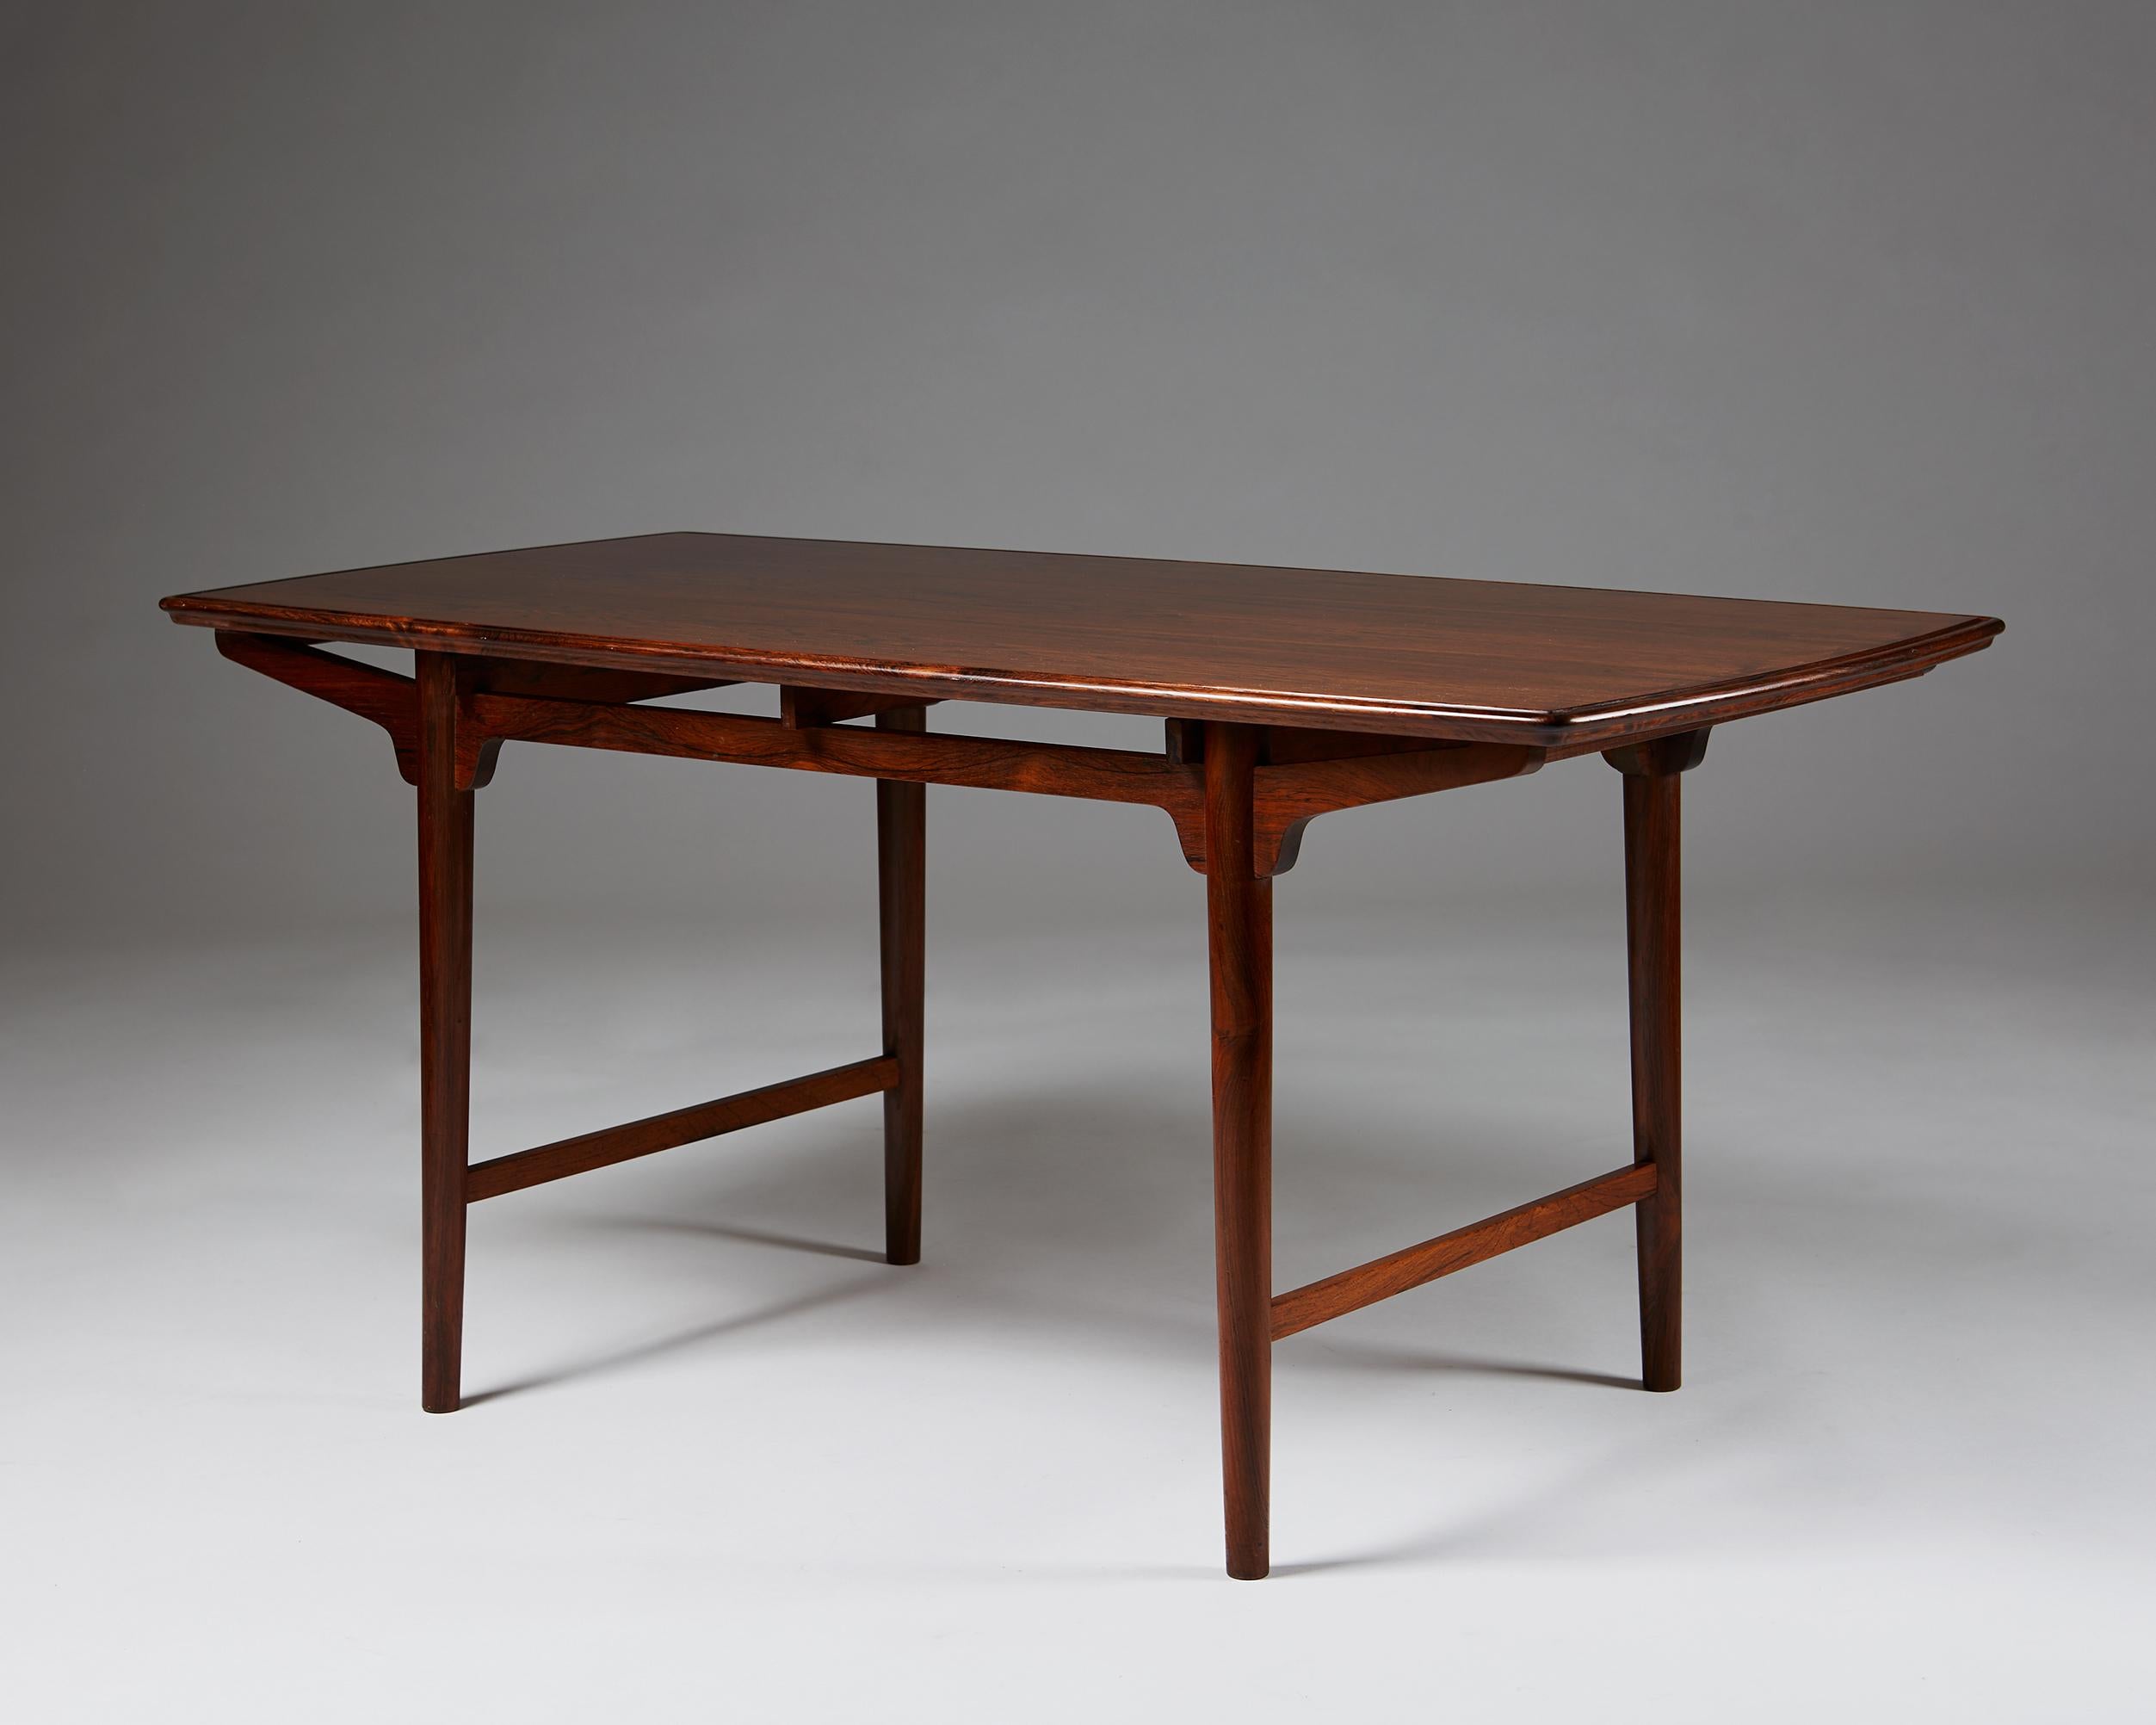 Scandinavian Modern Coffee Table Designed by Frode Holm for Illums Bolighus, Denmark, 1950s For Sale